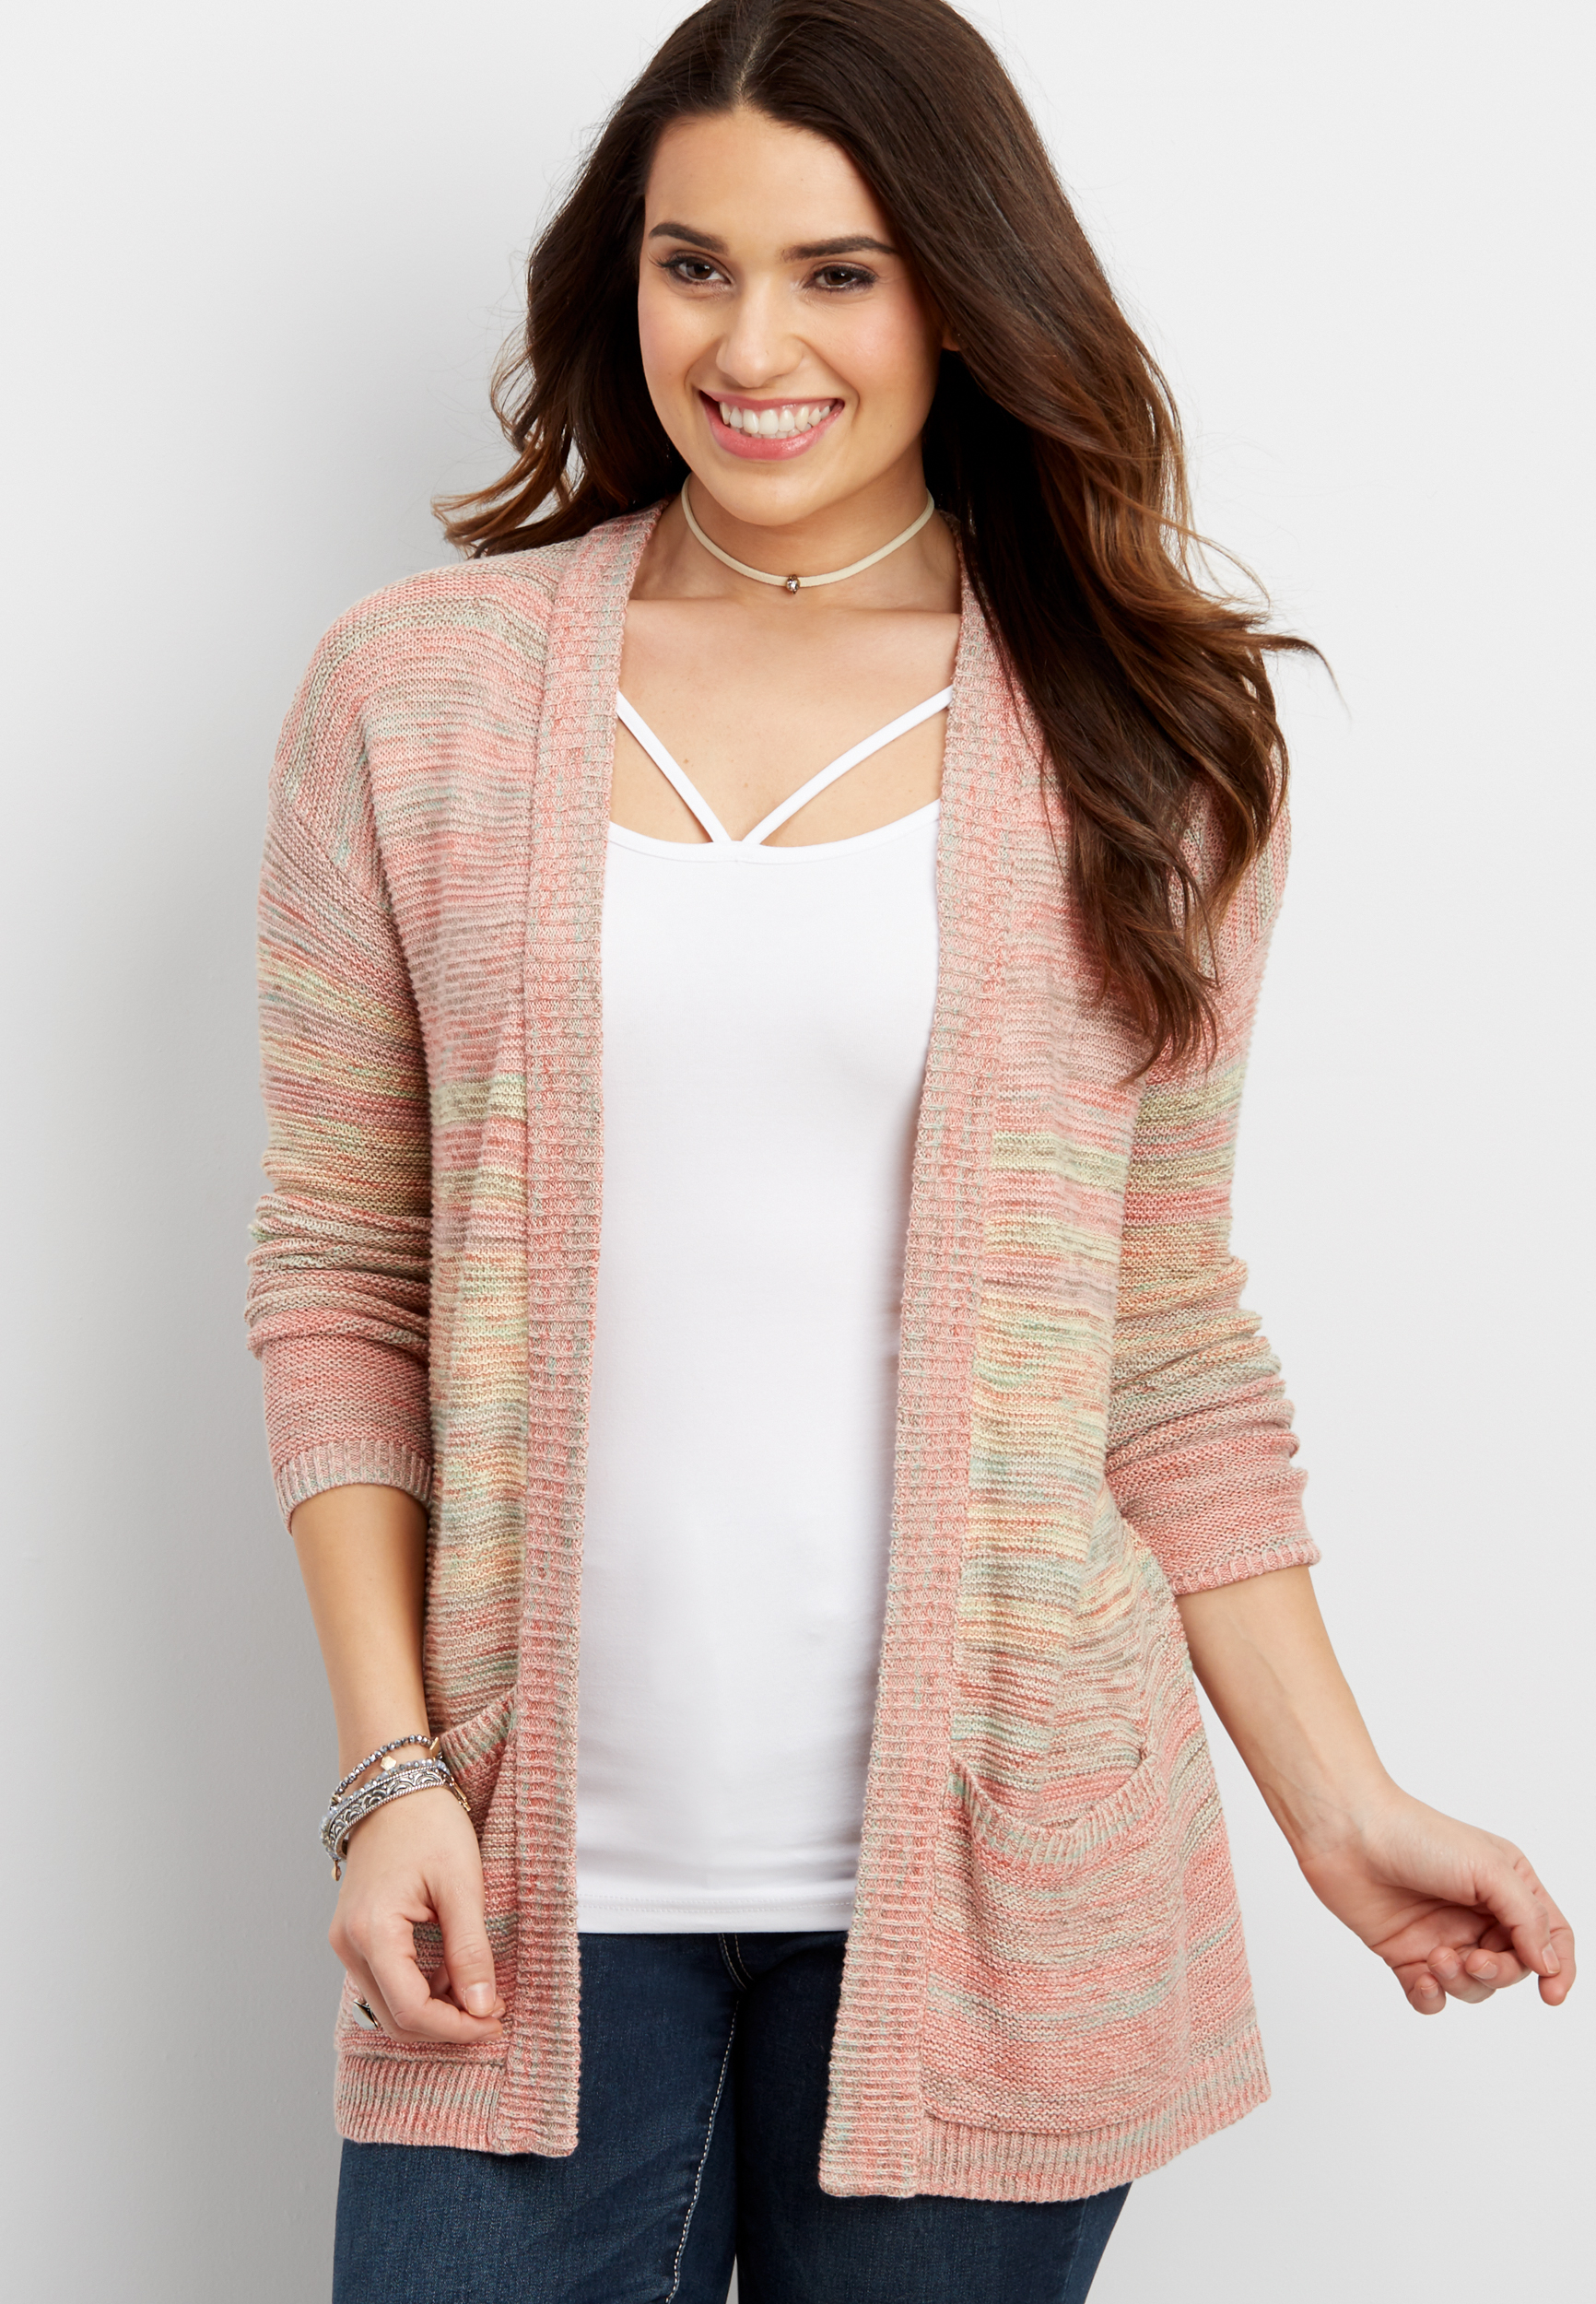 spacedye cardigan | maurices